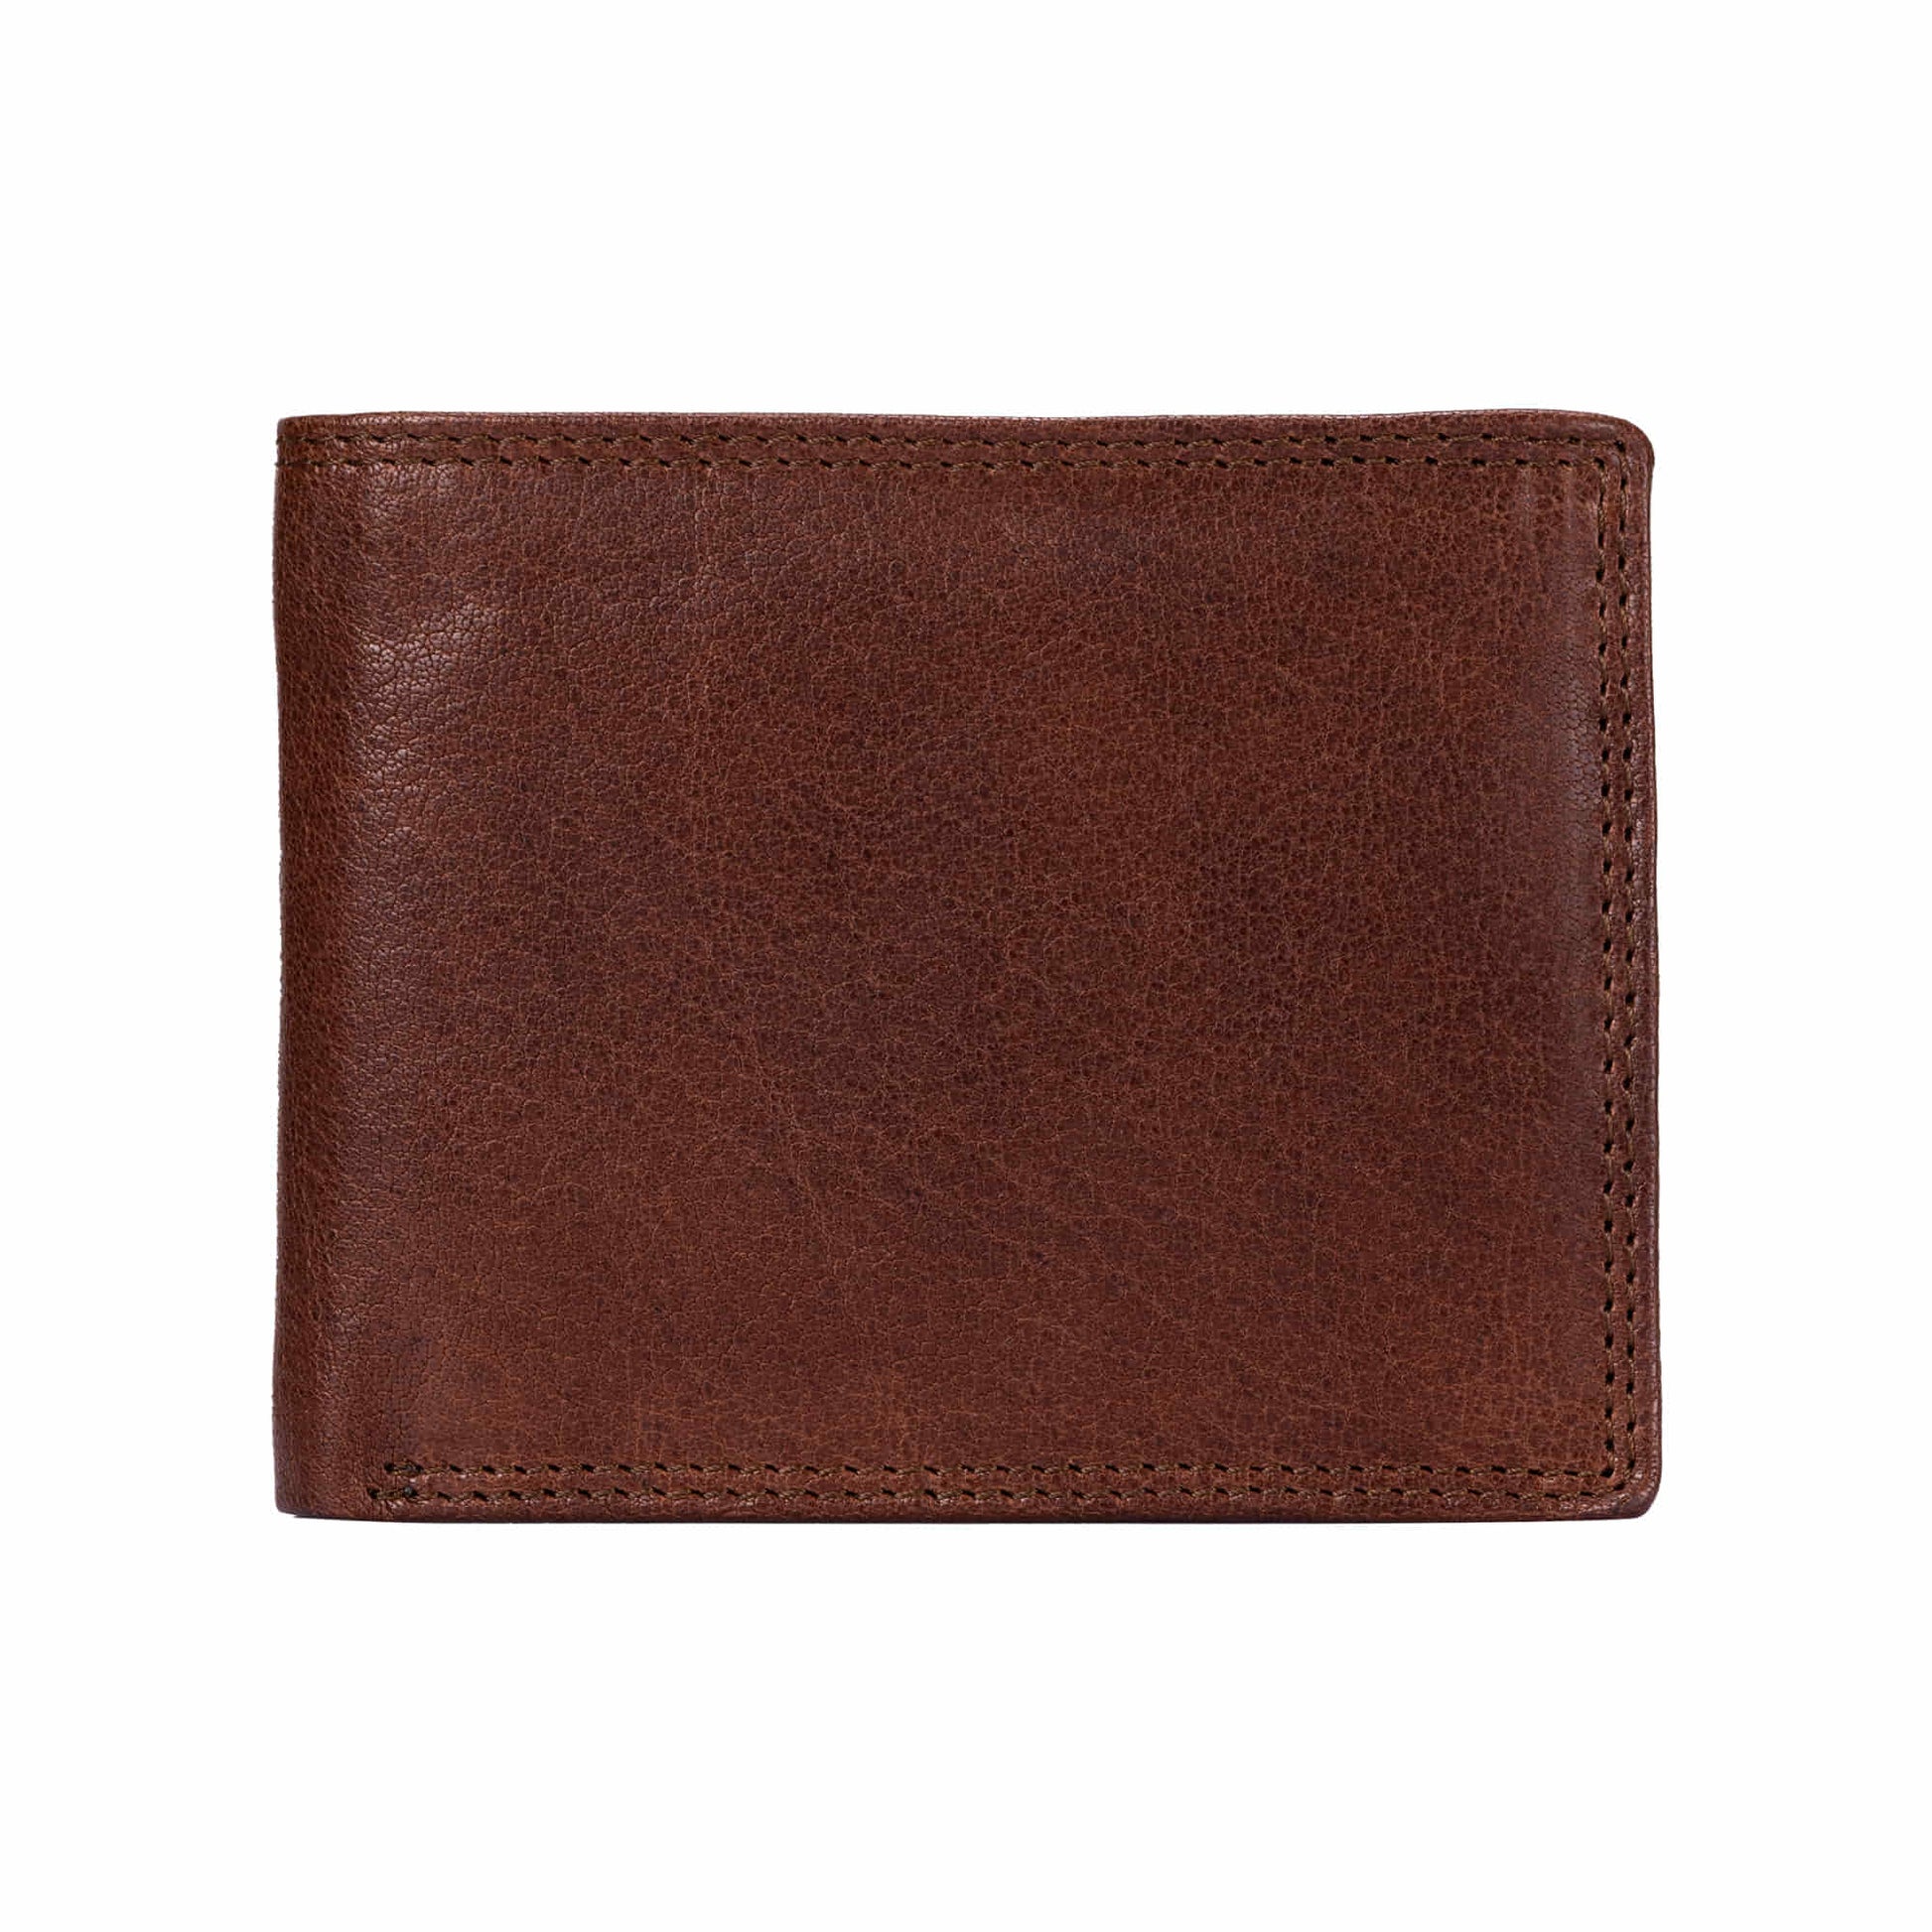 Cool Leather Mens Long Wallets Vintage Brown Bifold Long Wallets for M